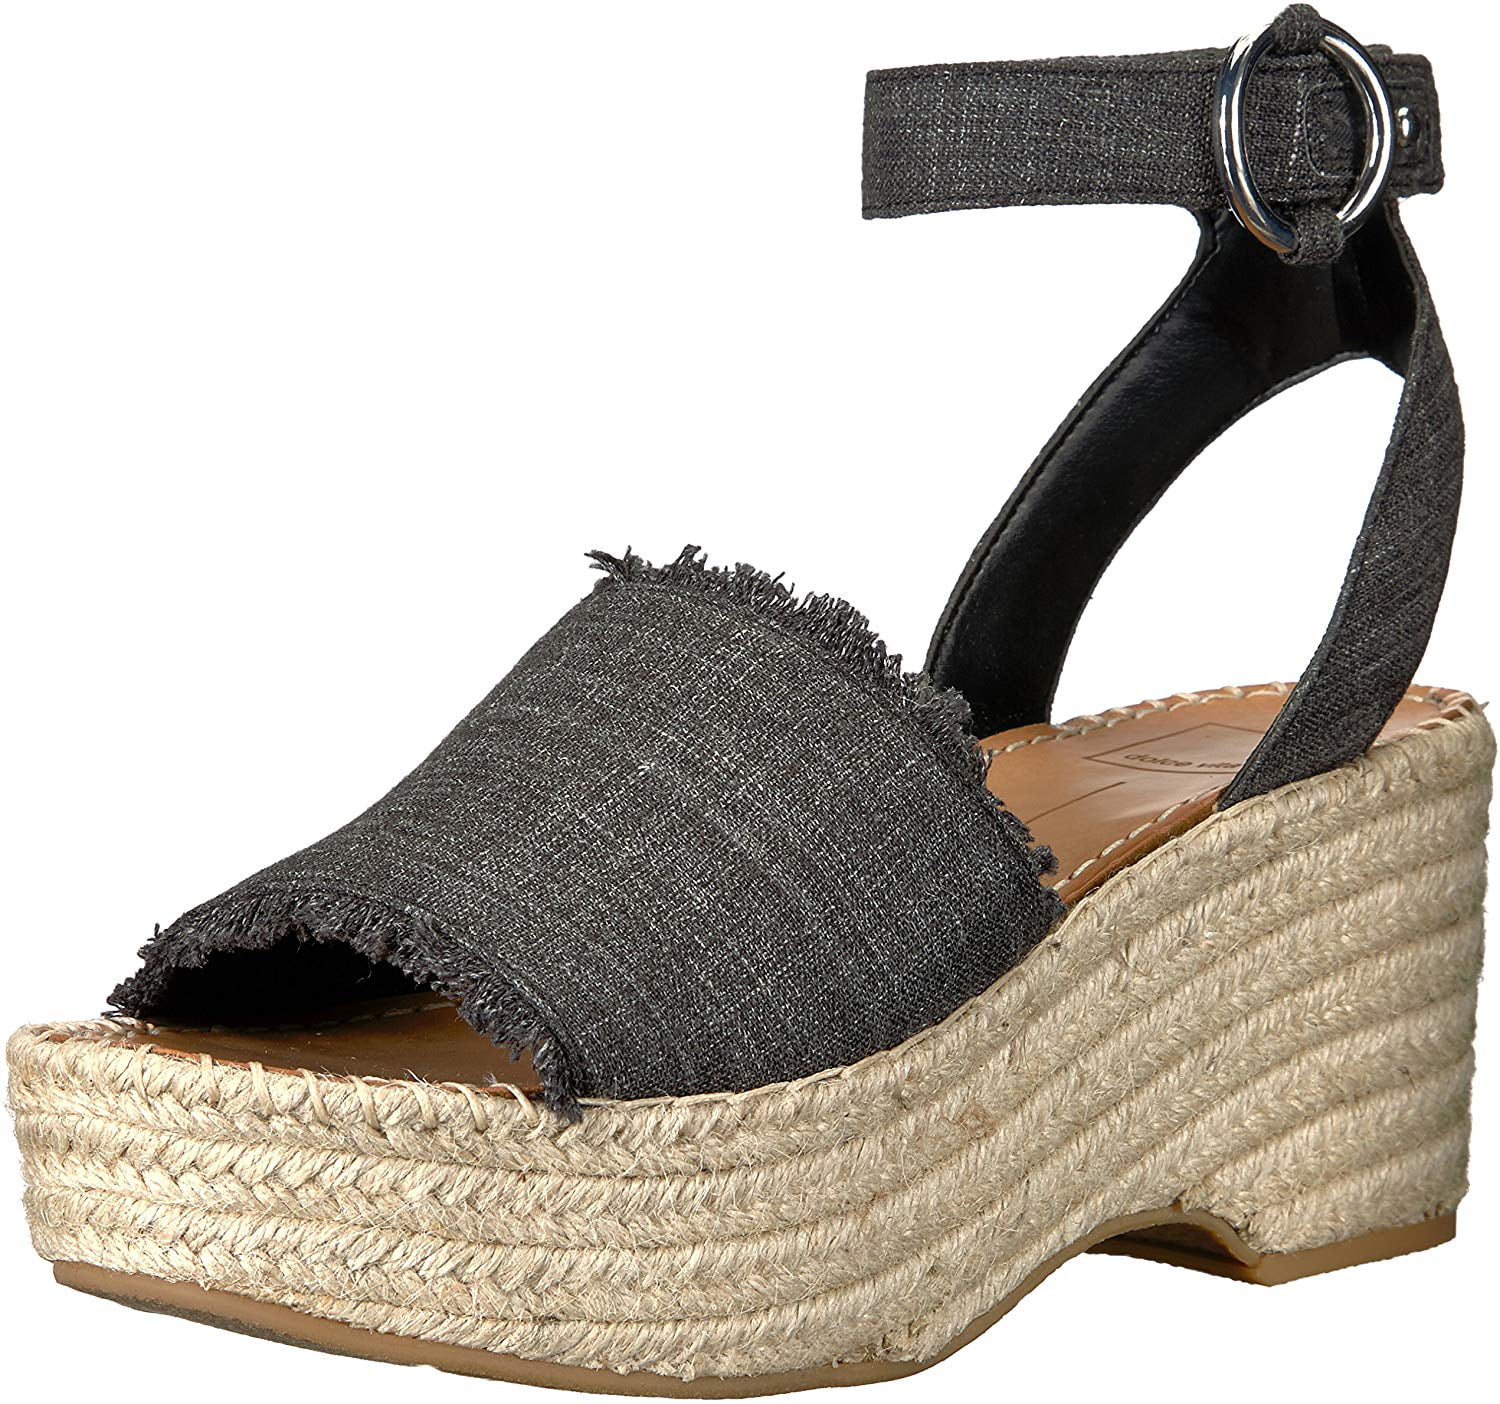 dolce vita lesly wedge